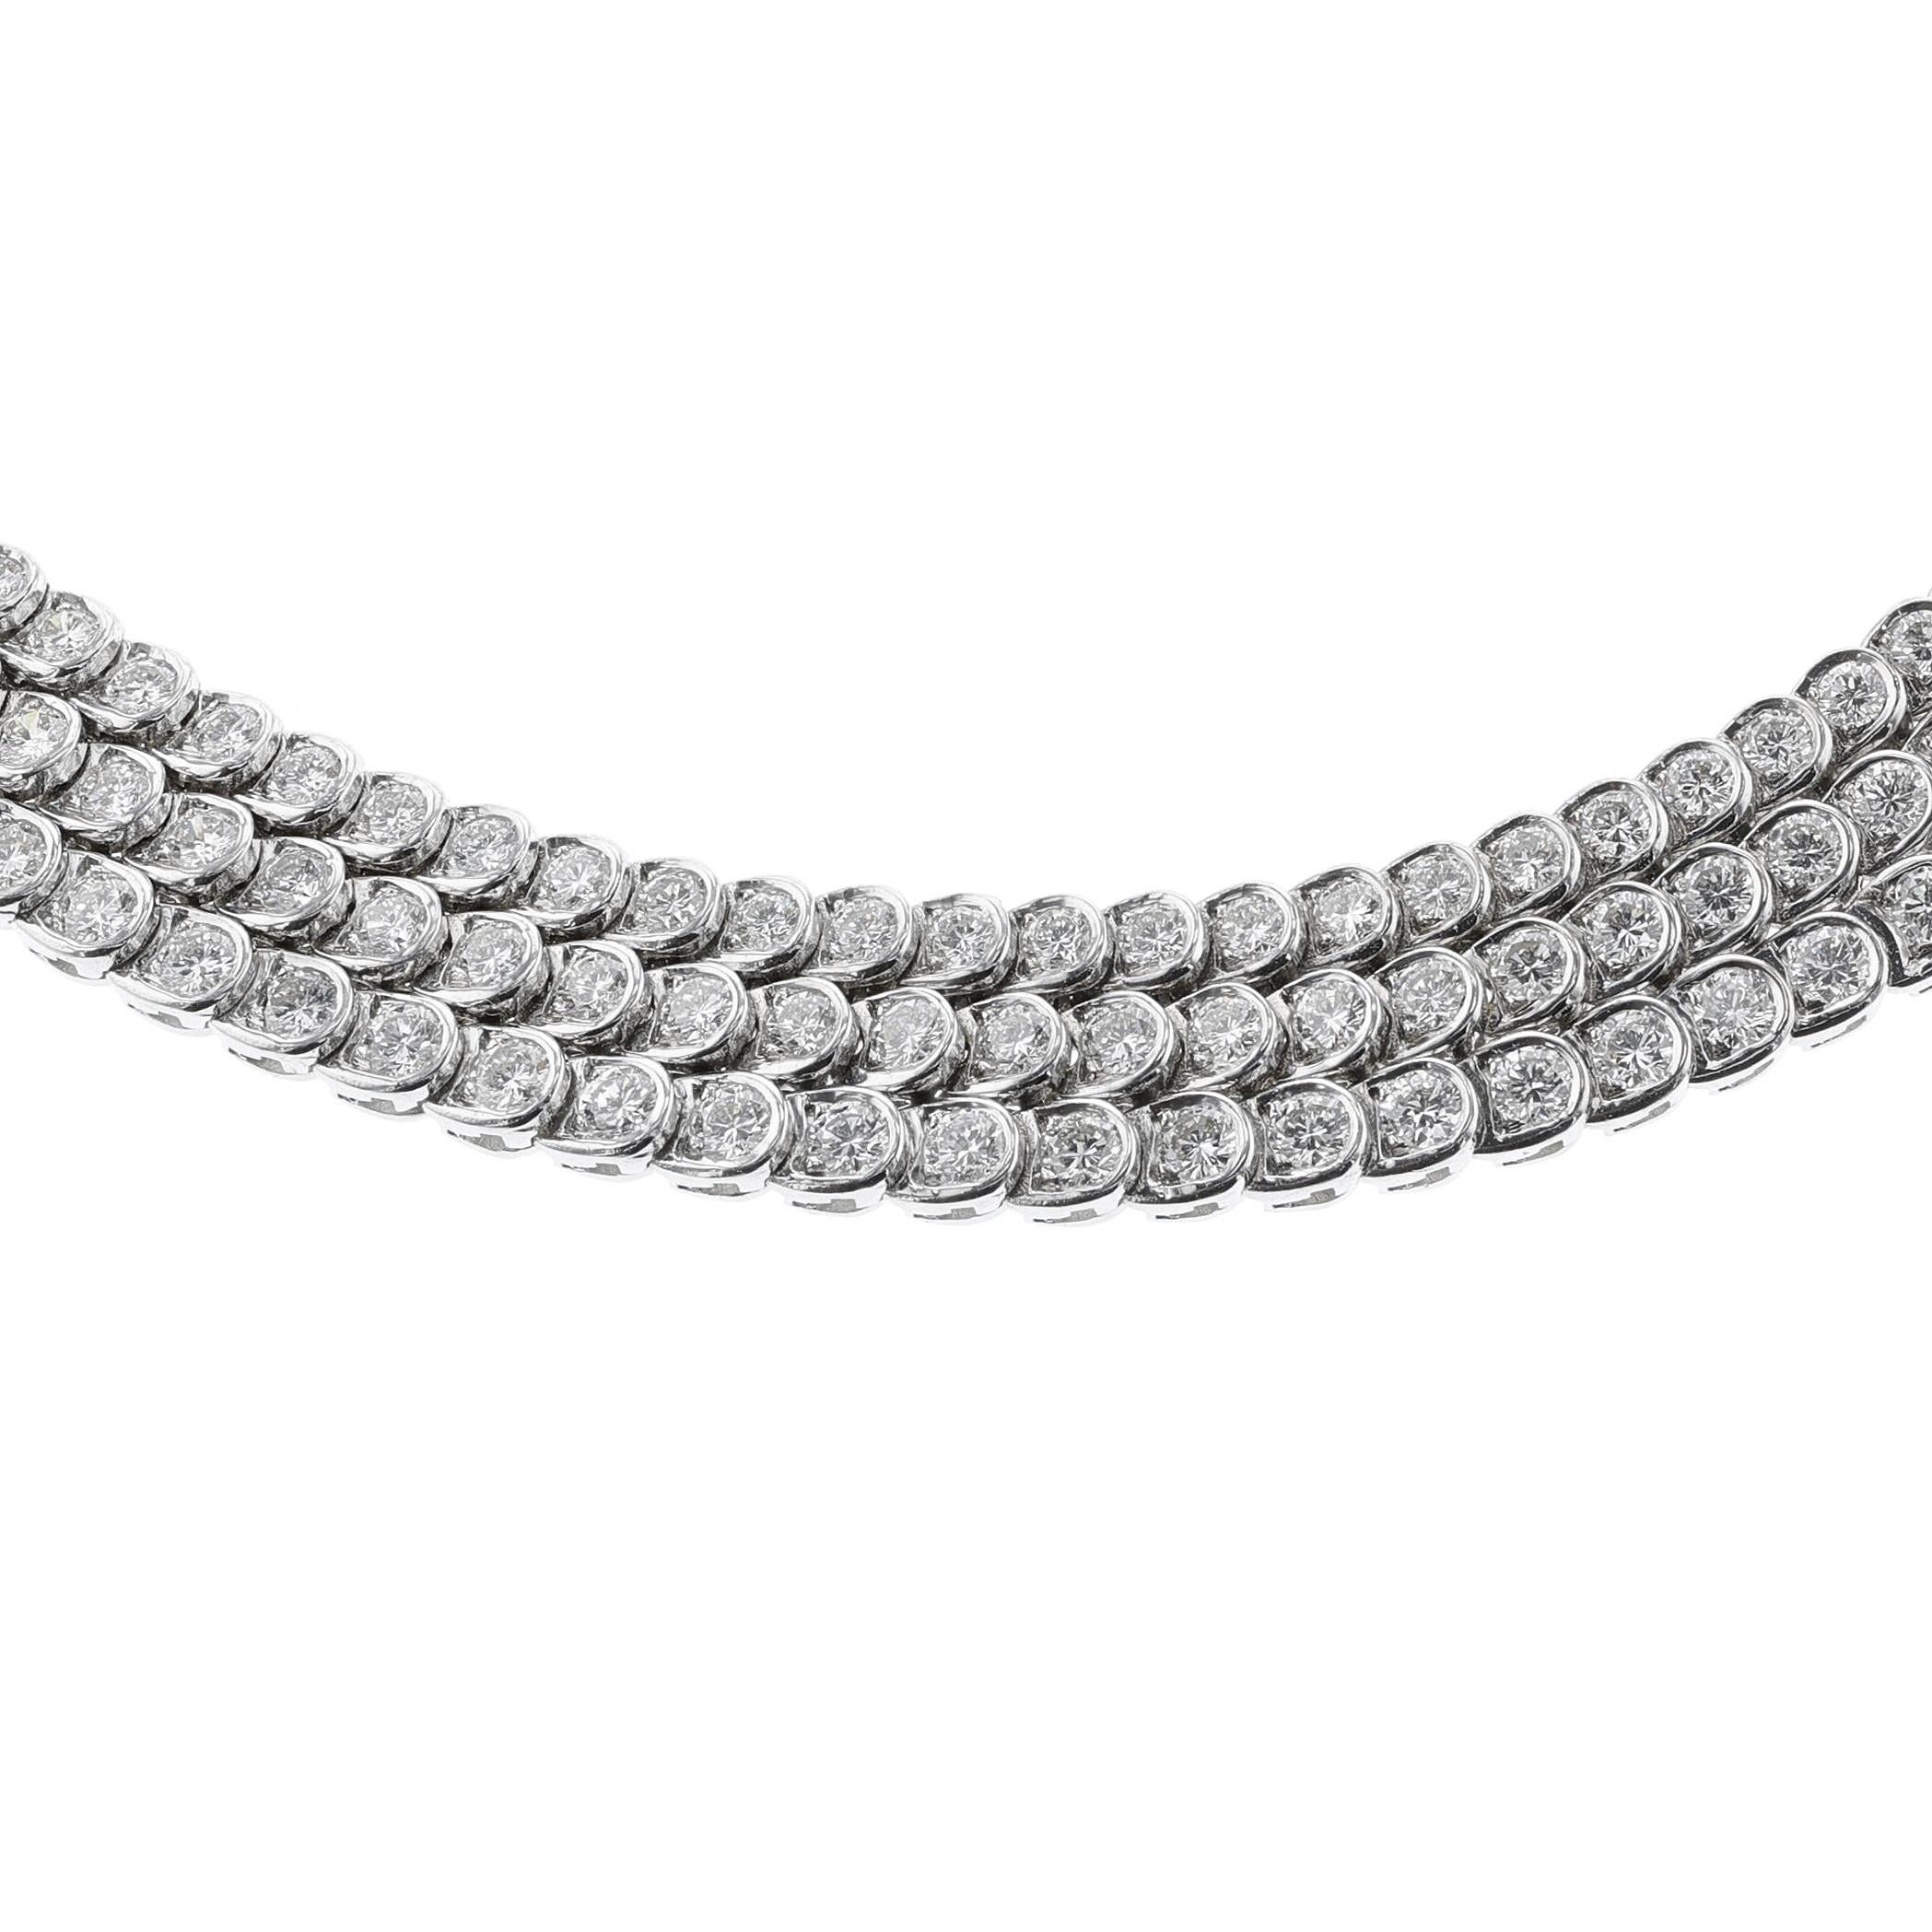 A Van Cleef & Arpels Three Line Diamond Necklace made in 18k White Gold. Signed Van Cleef & Arpels, makers mark- Pery et Fils, Numbered. Circa 1955. There are appx. 276 round diamonds weighing appx. 27-28 carats. The color is F-G, and the clarity is